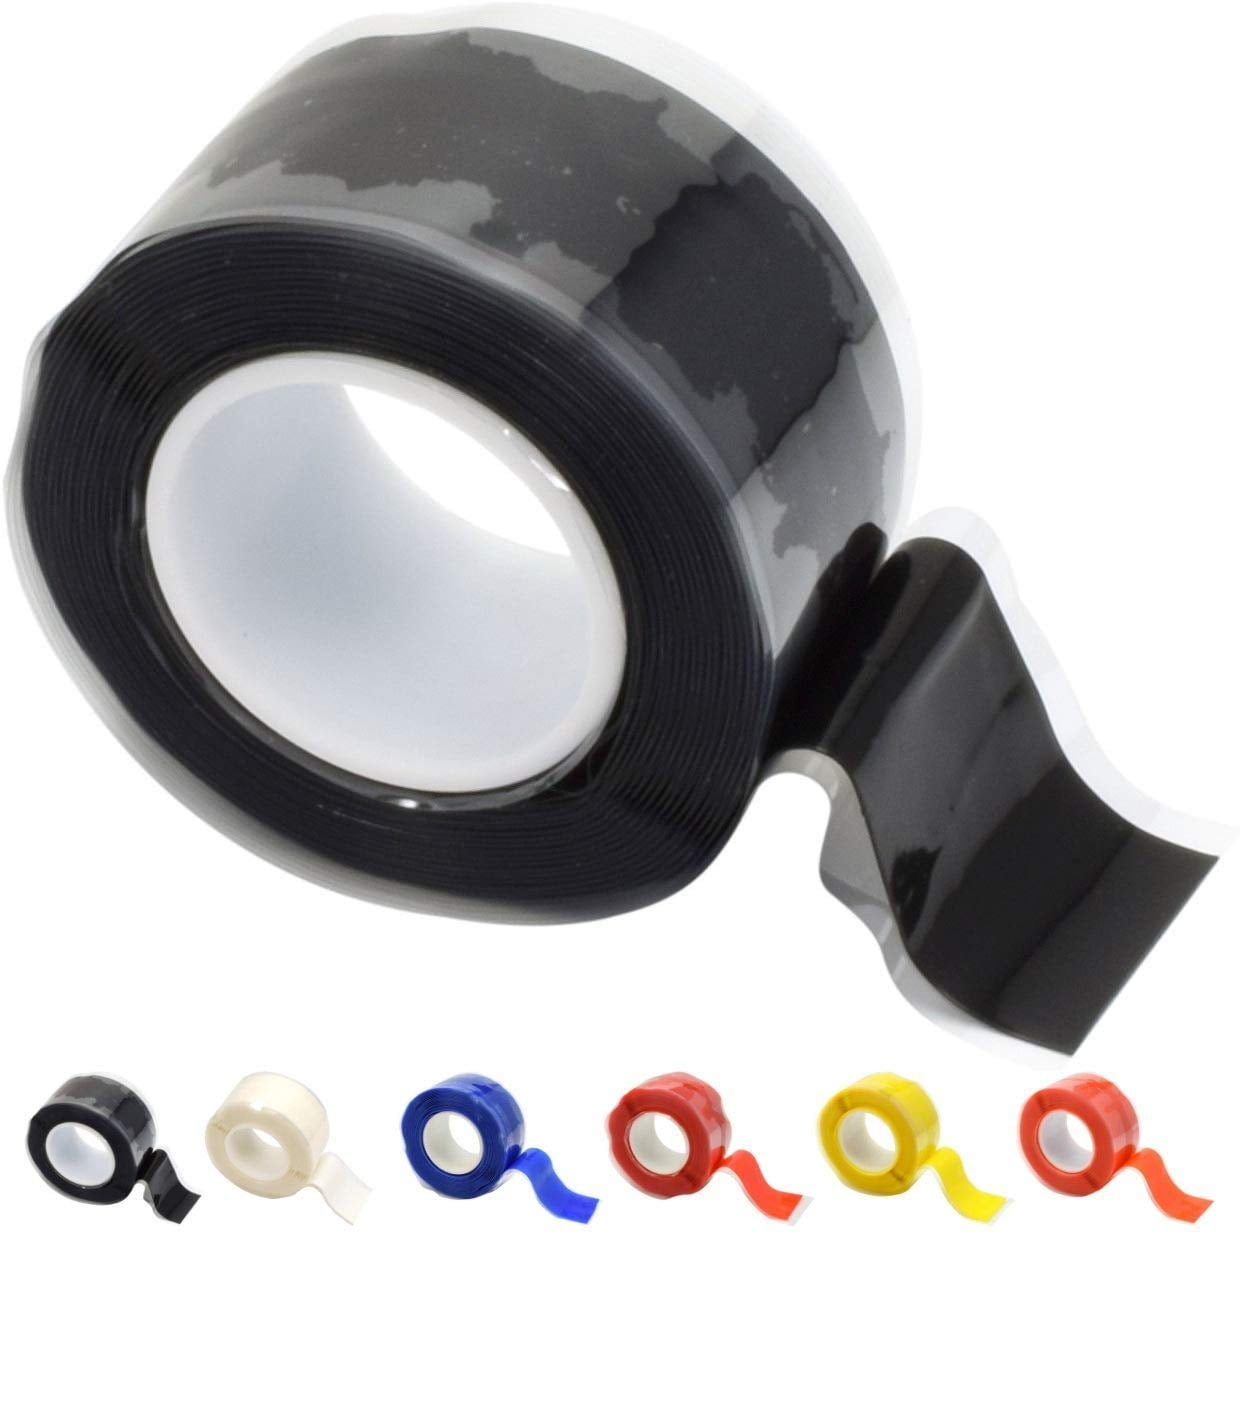 BESPORTBLE Glue Tape 1 Pair Dead Handlebar with Fixing Ring Sleeve